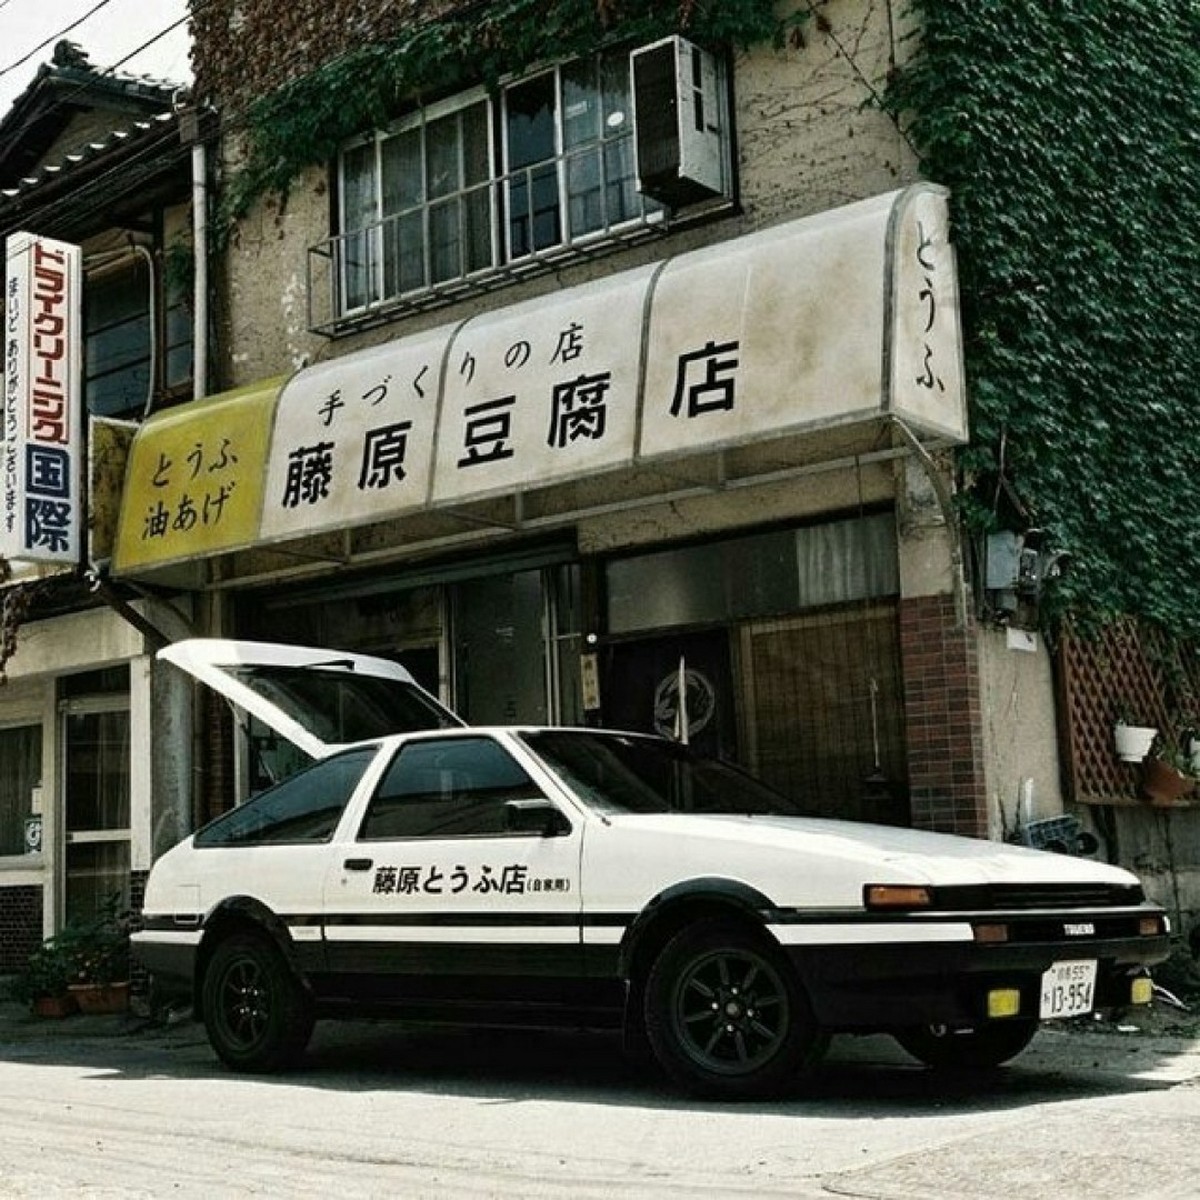 Fujiwara Tofu Cafe Opens to Hundreds of 'Initial D' Series Fans in